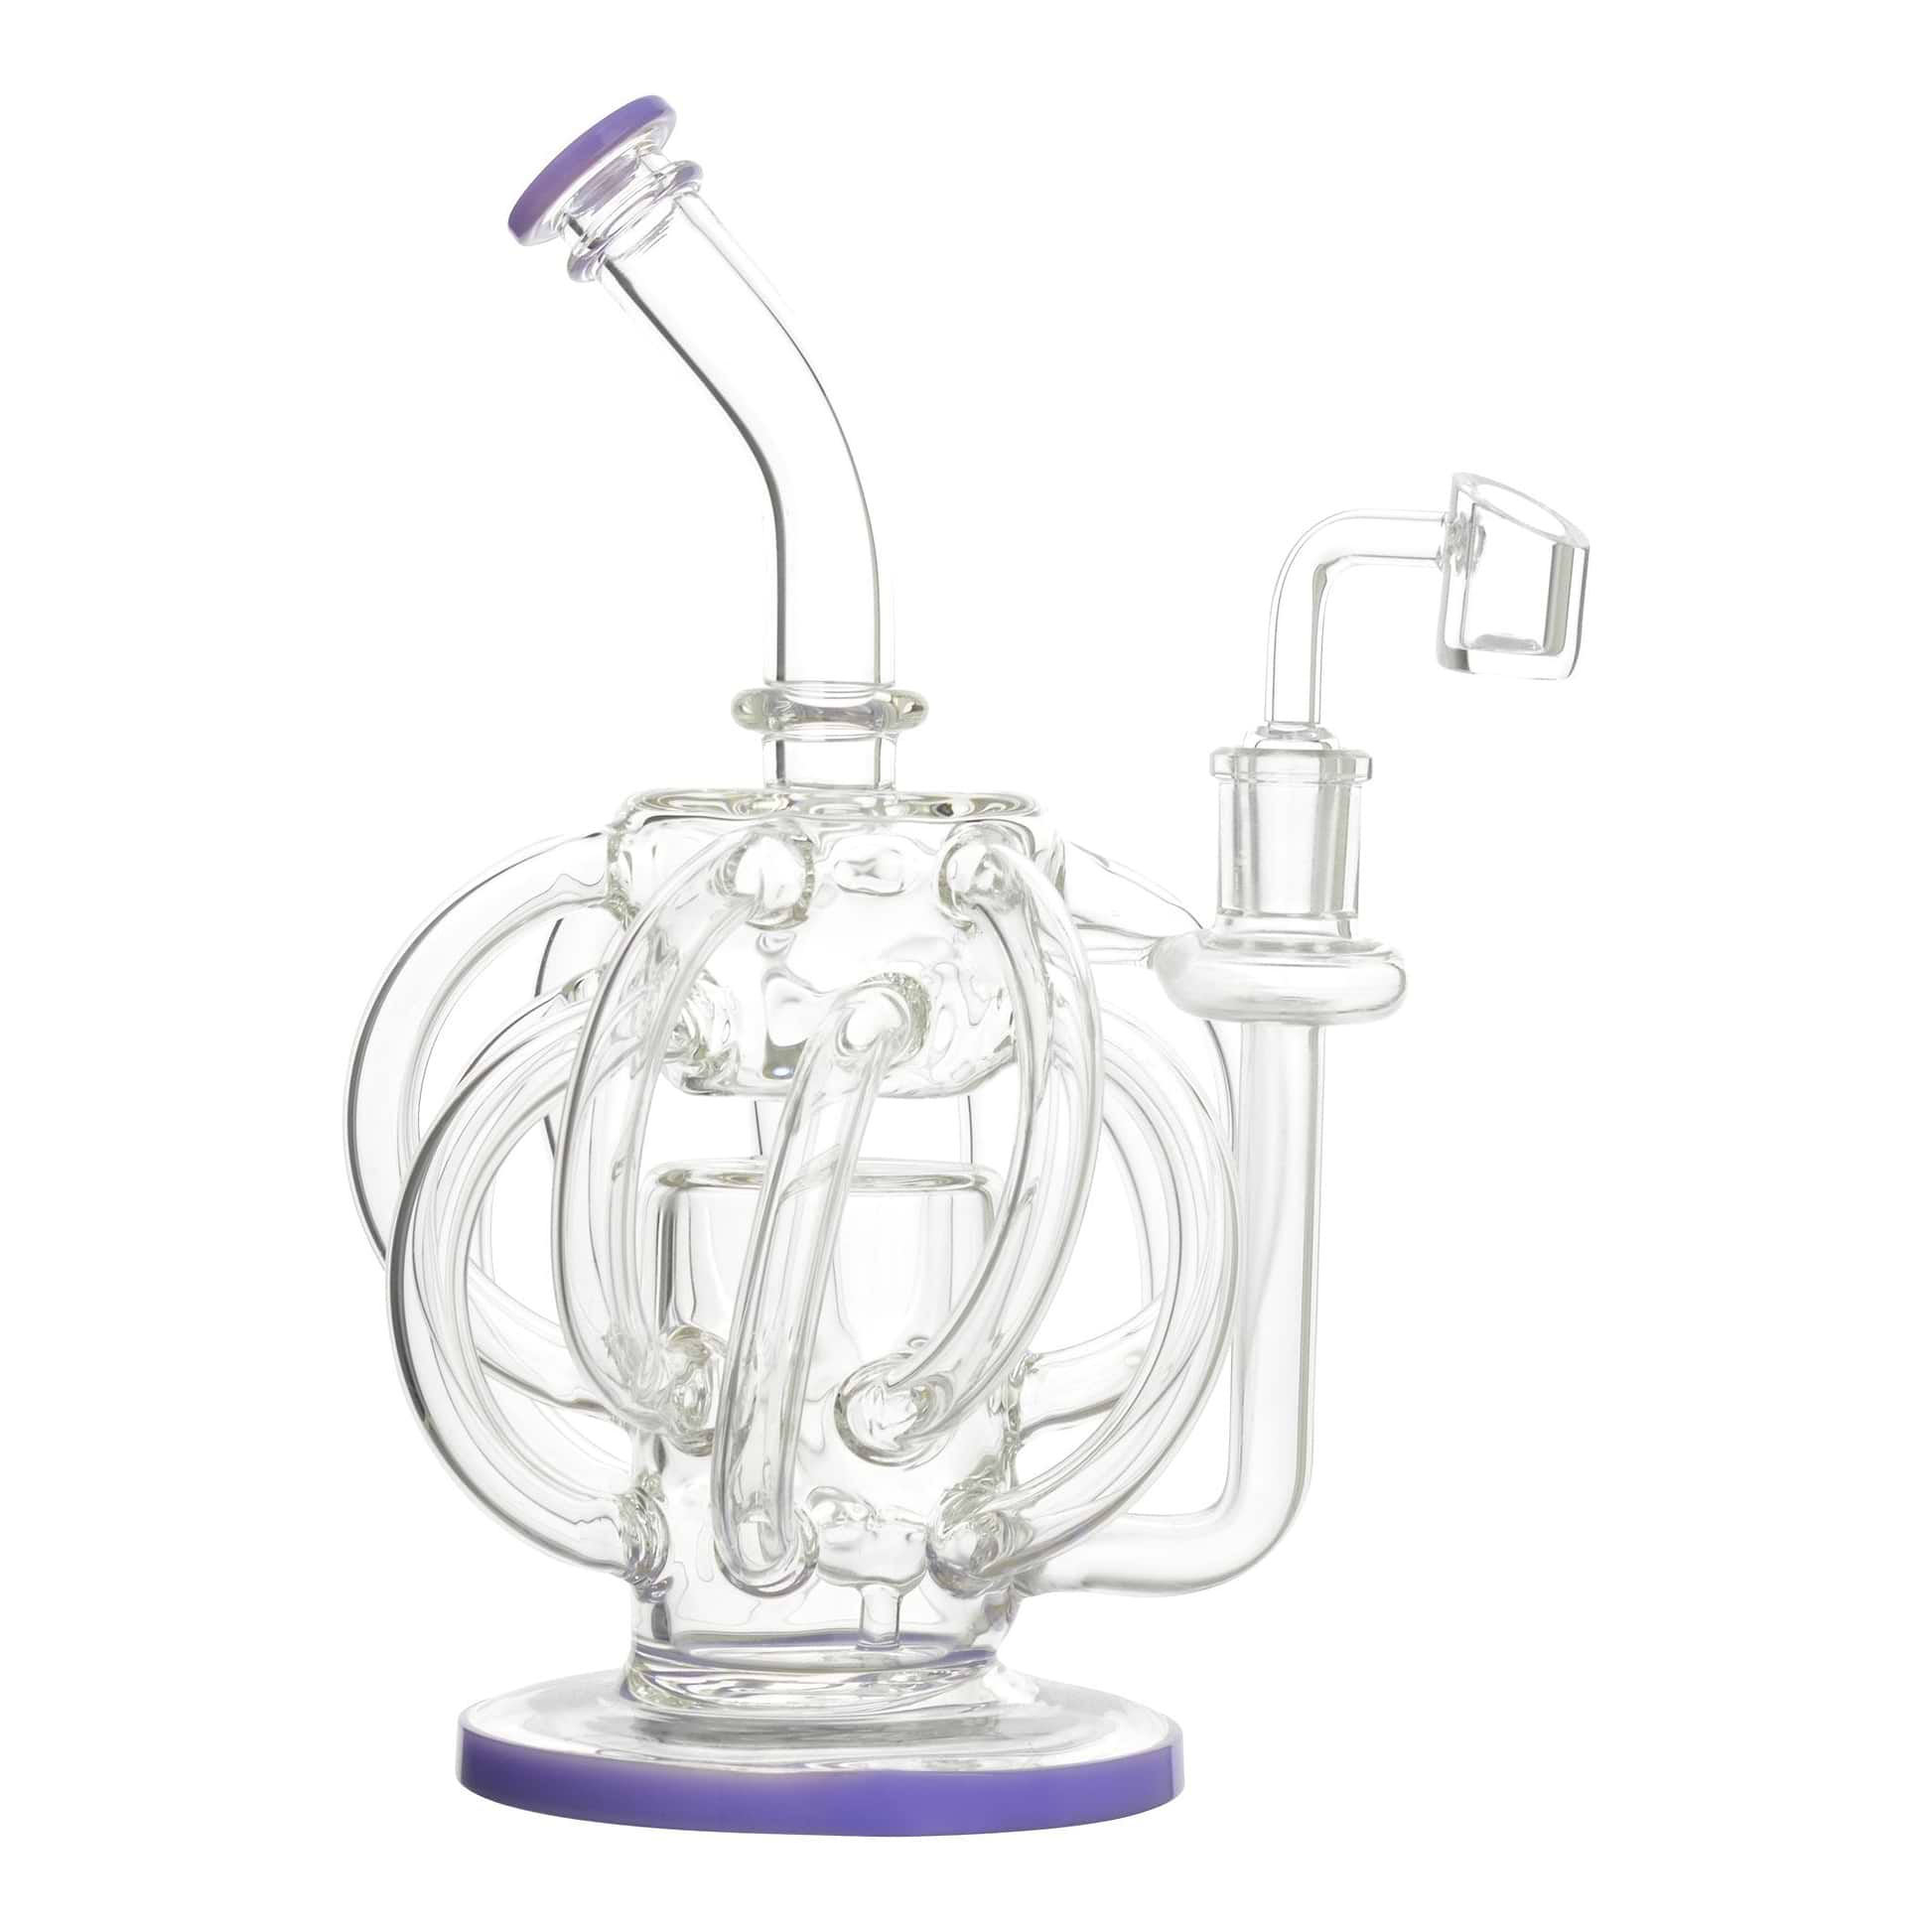 Full front shot of clear glass recycler dab rig intertwining spiral design with purple accents and banger on right